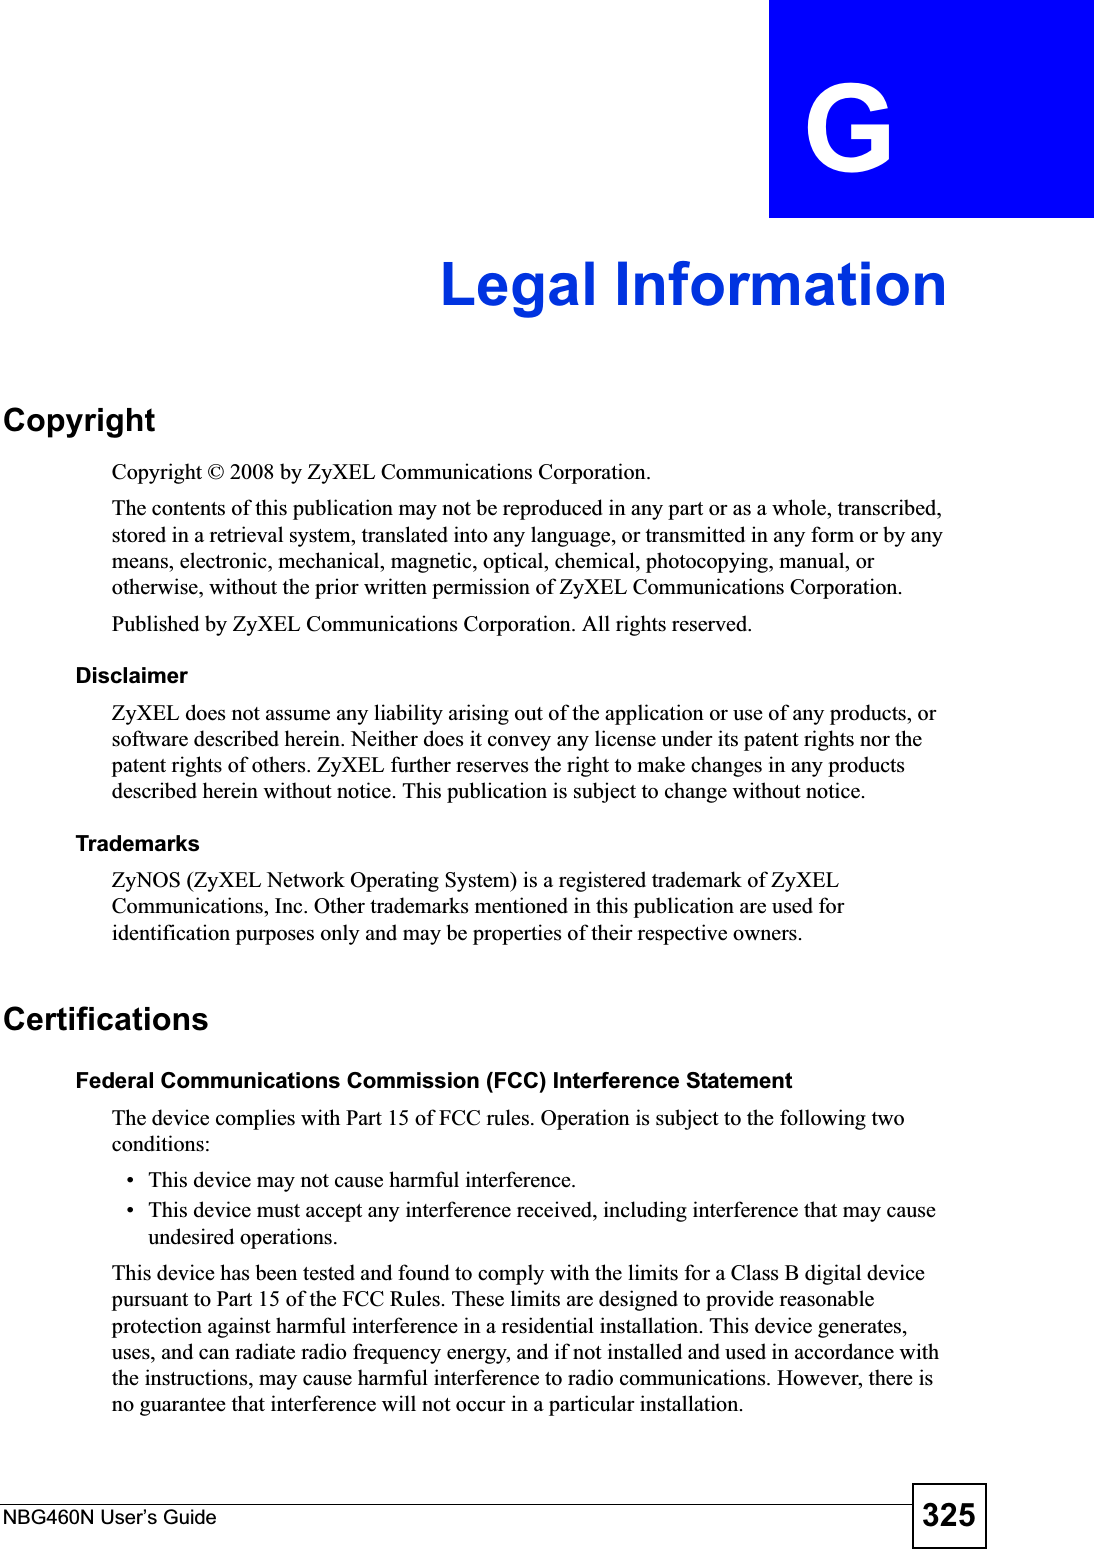 NBG460N User’s Guide 325APPENDIX  G Legal InformationCopyrightCopyright © 2008 by ZyXEL Communications Corporation.The contents of this publication may not be reproduced in any part or as a whole, transcribed, stored in a retrieval system, translated into any language, or transmitted in any form or by any means, electronic, mechanical, magnetic, optical, chemical, photocopying, manual, or otherwise, without the prior written permission of ZyXEL Communications Corporation.Published by ZyXEL Communications Corporation. All rights reserved.DisclaimerZyXEL does not assume any liability arising out of the application or use of any products, or software described herein. Neither does it convey any license under its patent rights nor the patent rights of others. ZyXEL further reserves the right to make changes in any products described herein without notice. This publication is subject to change without notice.TrademarksZyNOS (ZyXEL Network Operating System) is a registered trademark of ZyXEL Communications, Inc. Other trademarks mentioned in this publication are used for identification purposes only and may be properties of their respective owners.CertificationsFederal Communications Commission (FCC) Interference StatementThe device complies with Part 15 of FCC rules. Operation is subject to the following two conditions:• This device may not cause harmful interference.• This device must accept any interference received, including interference that may cause undesired operations.This device has been tested and found to comply with the limits for a Class B digital device pursuant to Part 15 of the FCC Rules. These limits are designed to provide reasonable protection against harmful interference in a residential installation. This device generates, uses, and can radiate radio frequency energy, and if not installed and used in accordance with the instructions, may cause harmful interference to radio communications. However, there is no guarantee that interference will not occur in a particular installation.